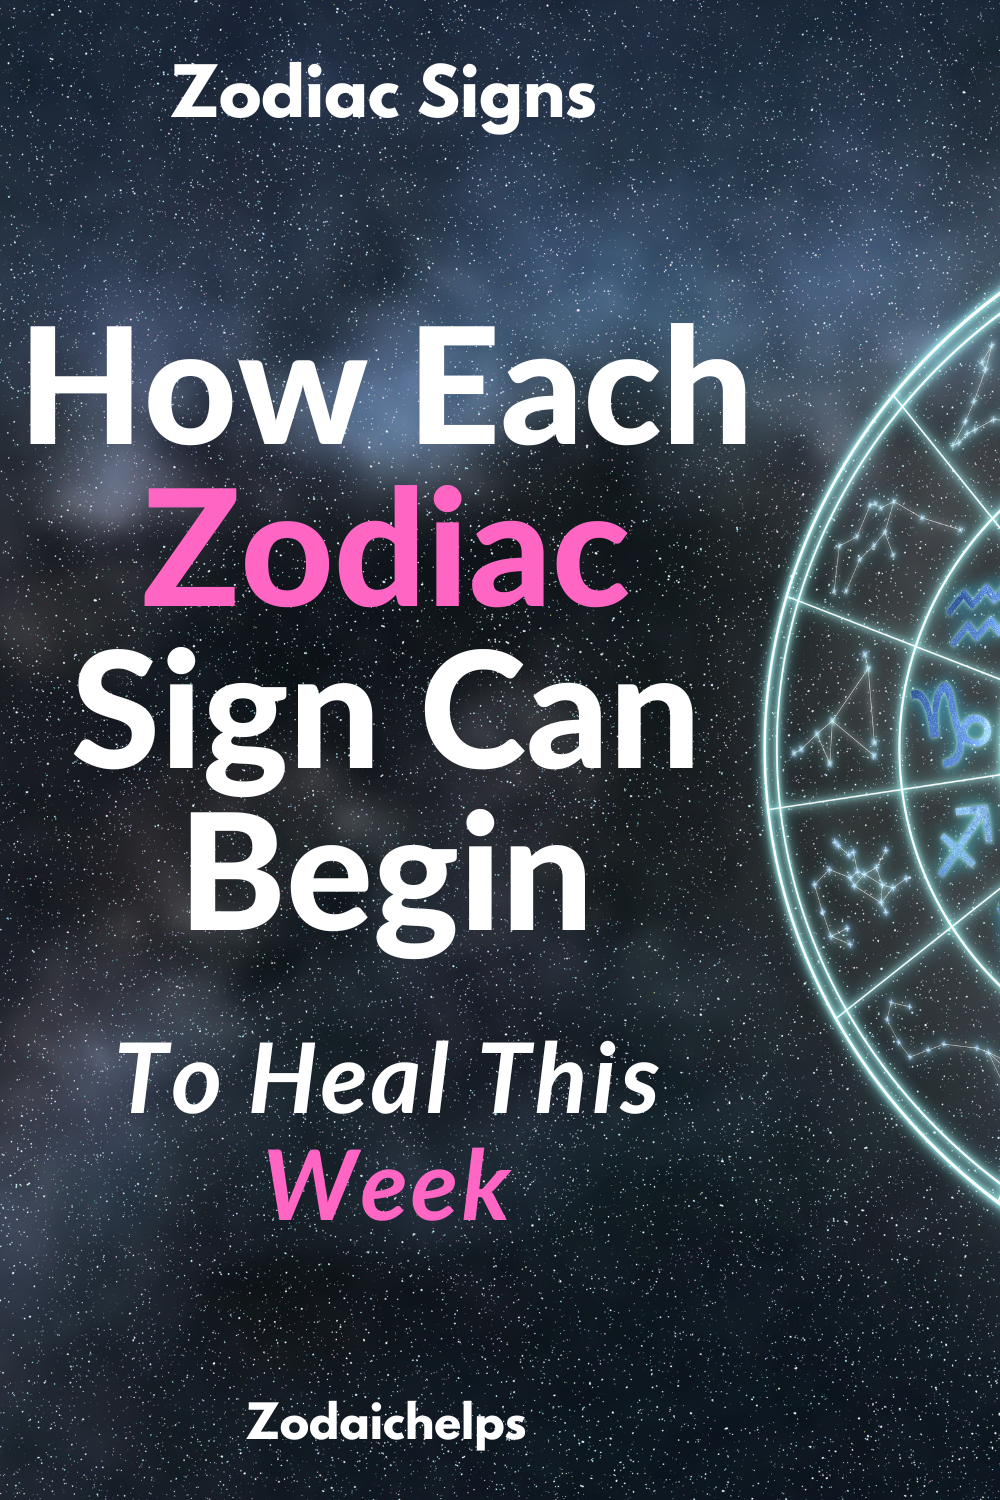 How Each Zodiac Sign Can Begin To Heal This Week